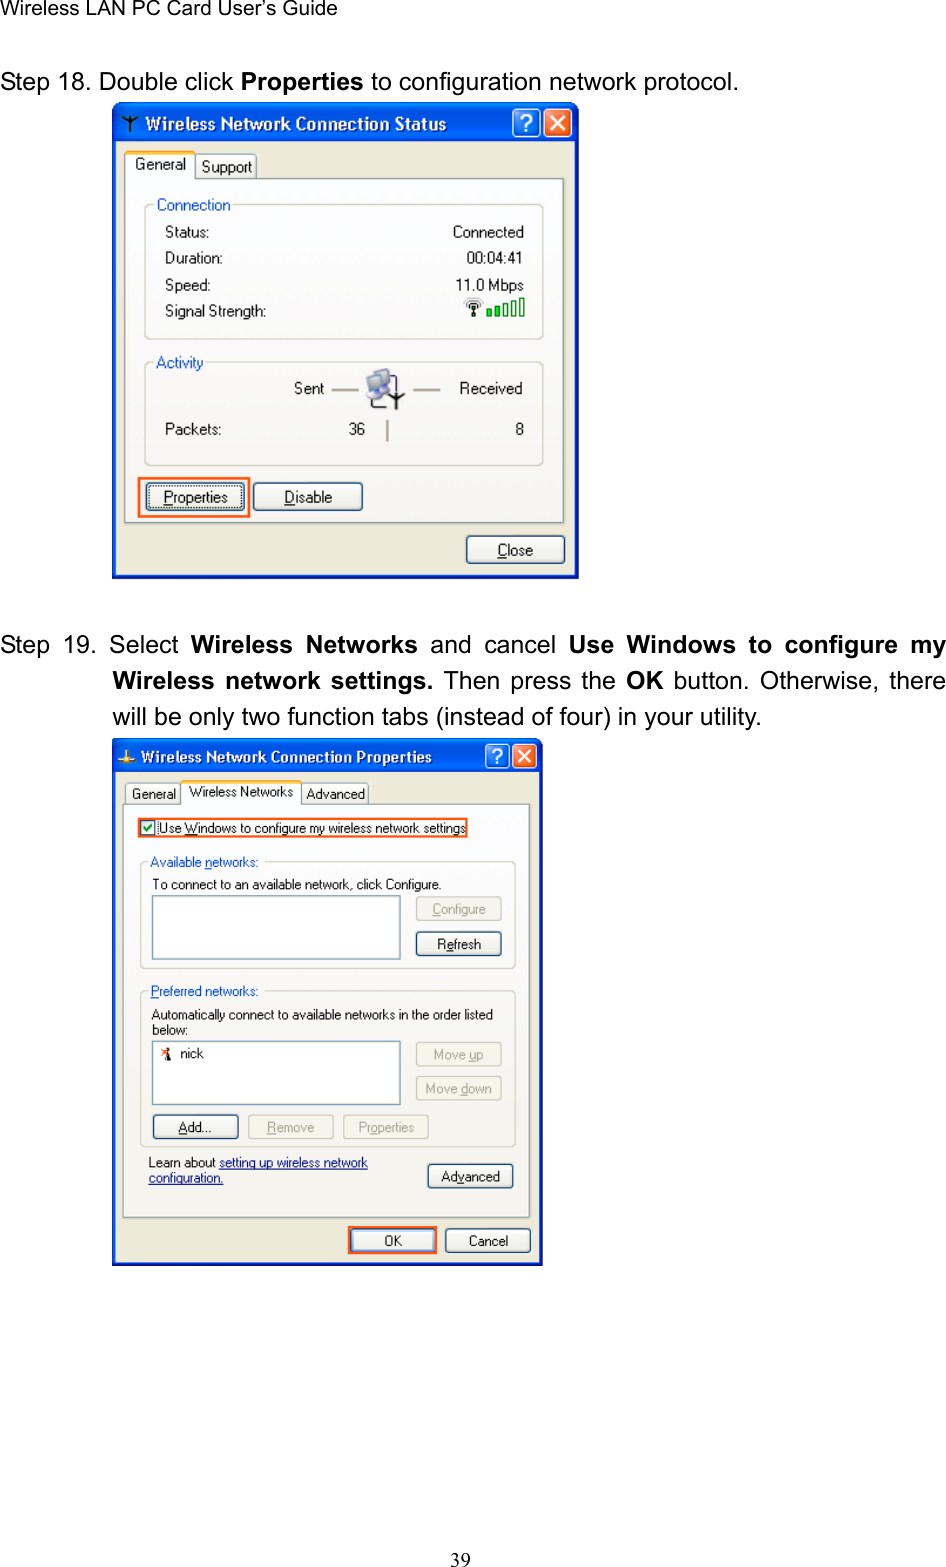 Wireless LAN PC Card User’s Guide39Step 18. Double click Properties to configuration network protocol.Step 19. Select Wireless Networks and cancel Use Windows to configure myWireless network settings. Then press the OK button. Otherwise, therewill be only two function tabs (instead of four) in your utility.